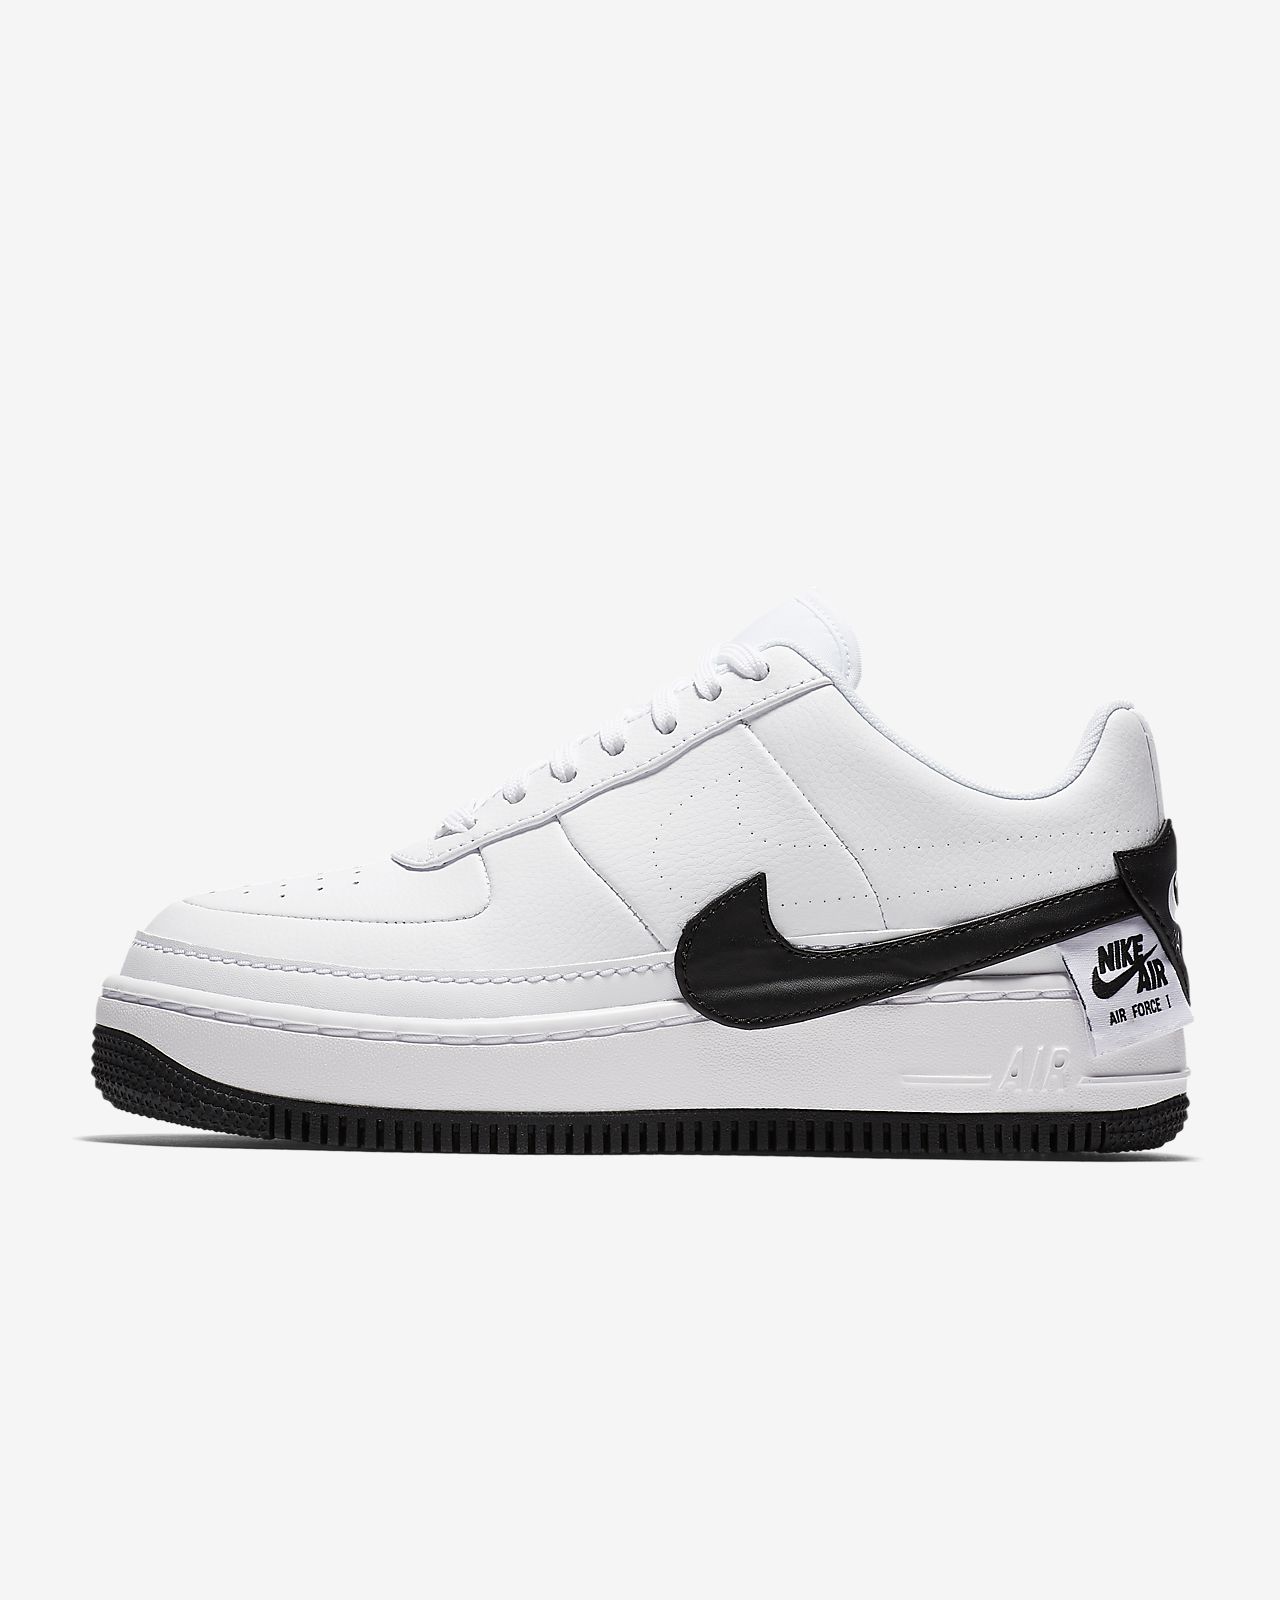 Chaussure Nike Air Force 1 Jester XX pour Femme